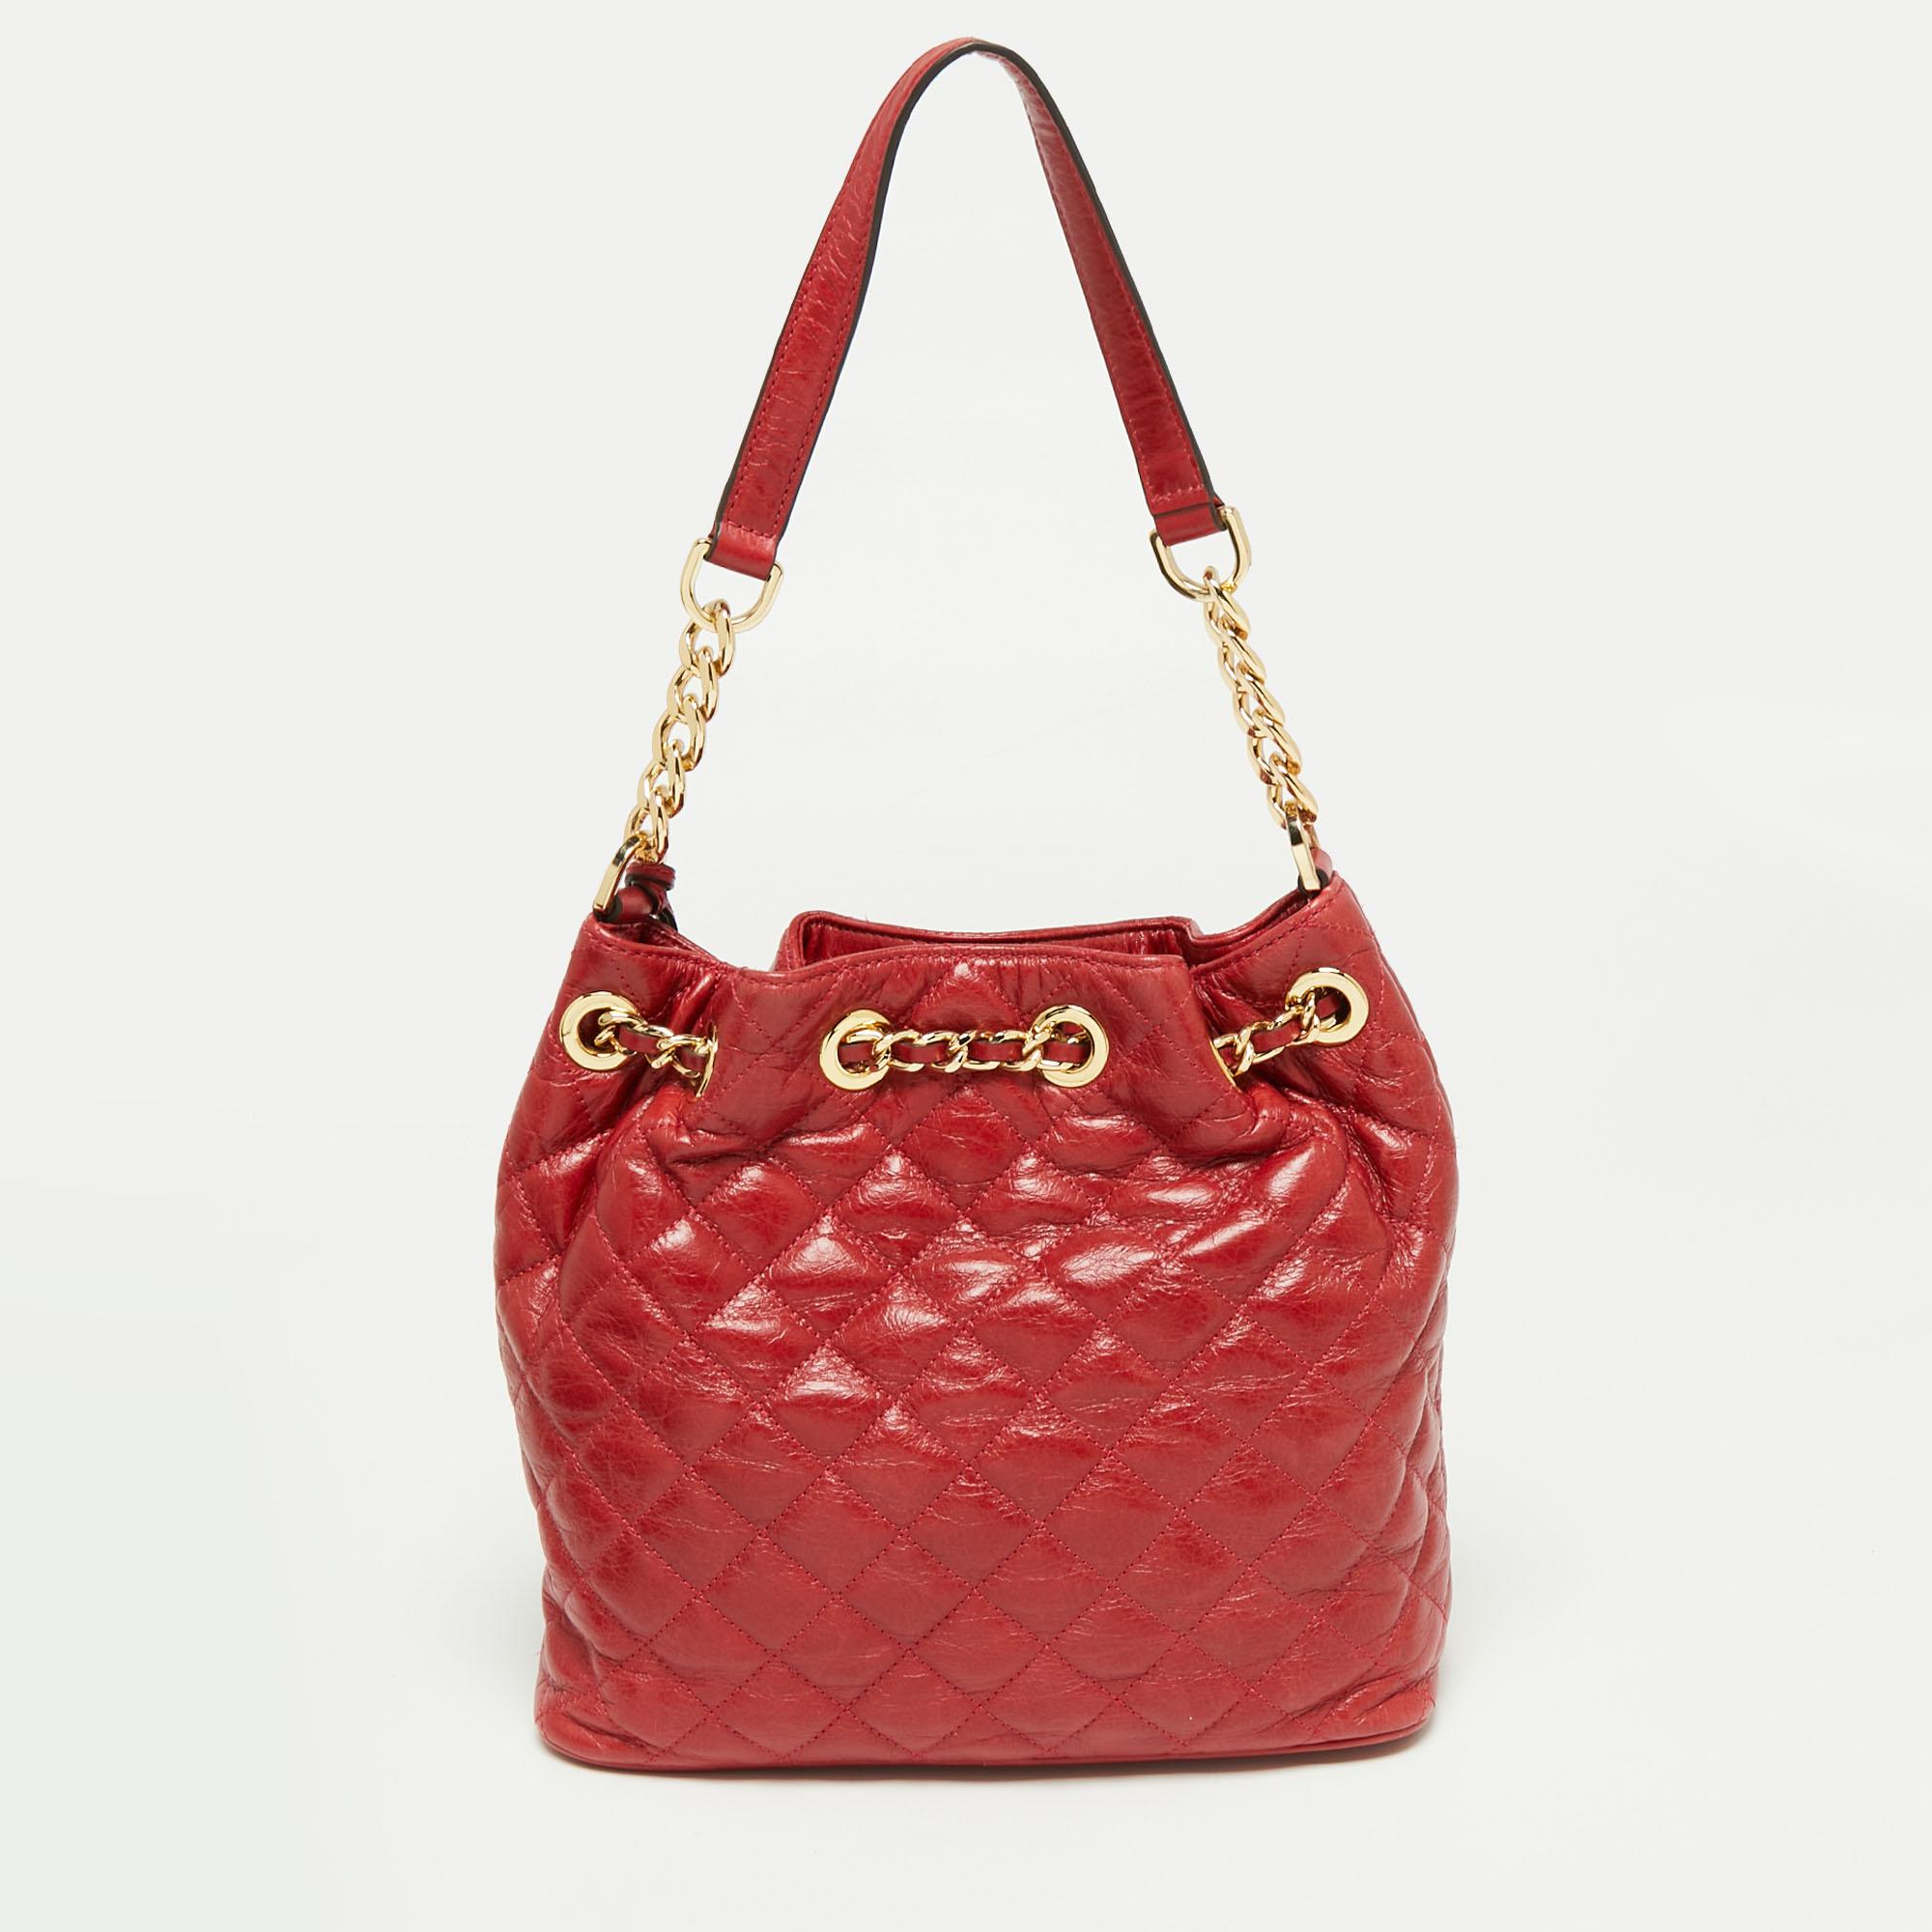 This MICHAEL Michael Kors bag is timeless yet immediately distinctive. Created from quilted leather, it displays a branded charm on the front, gold-tone hardware, and a handle. The chain-detailed drawstring closure elevates the red silhouette of the